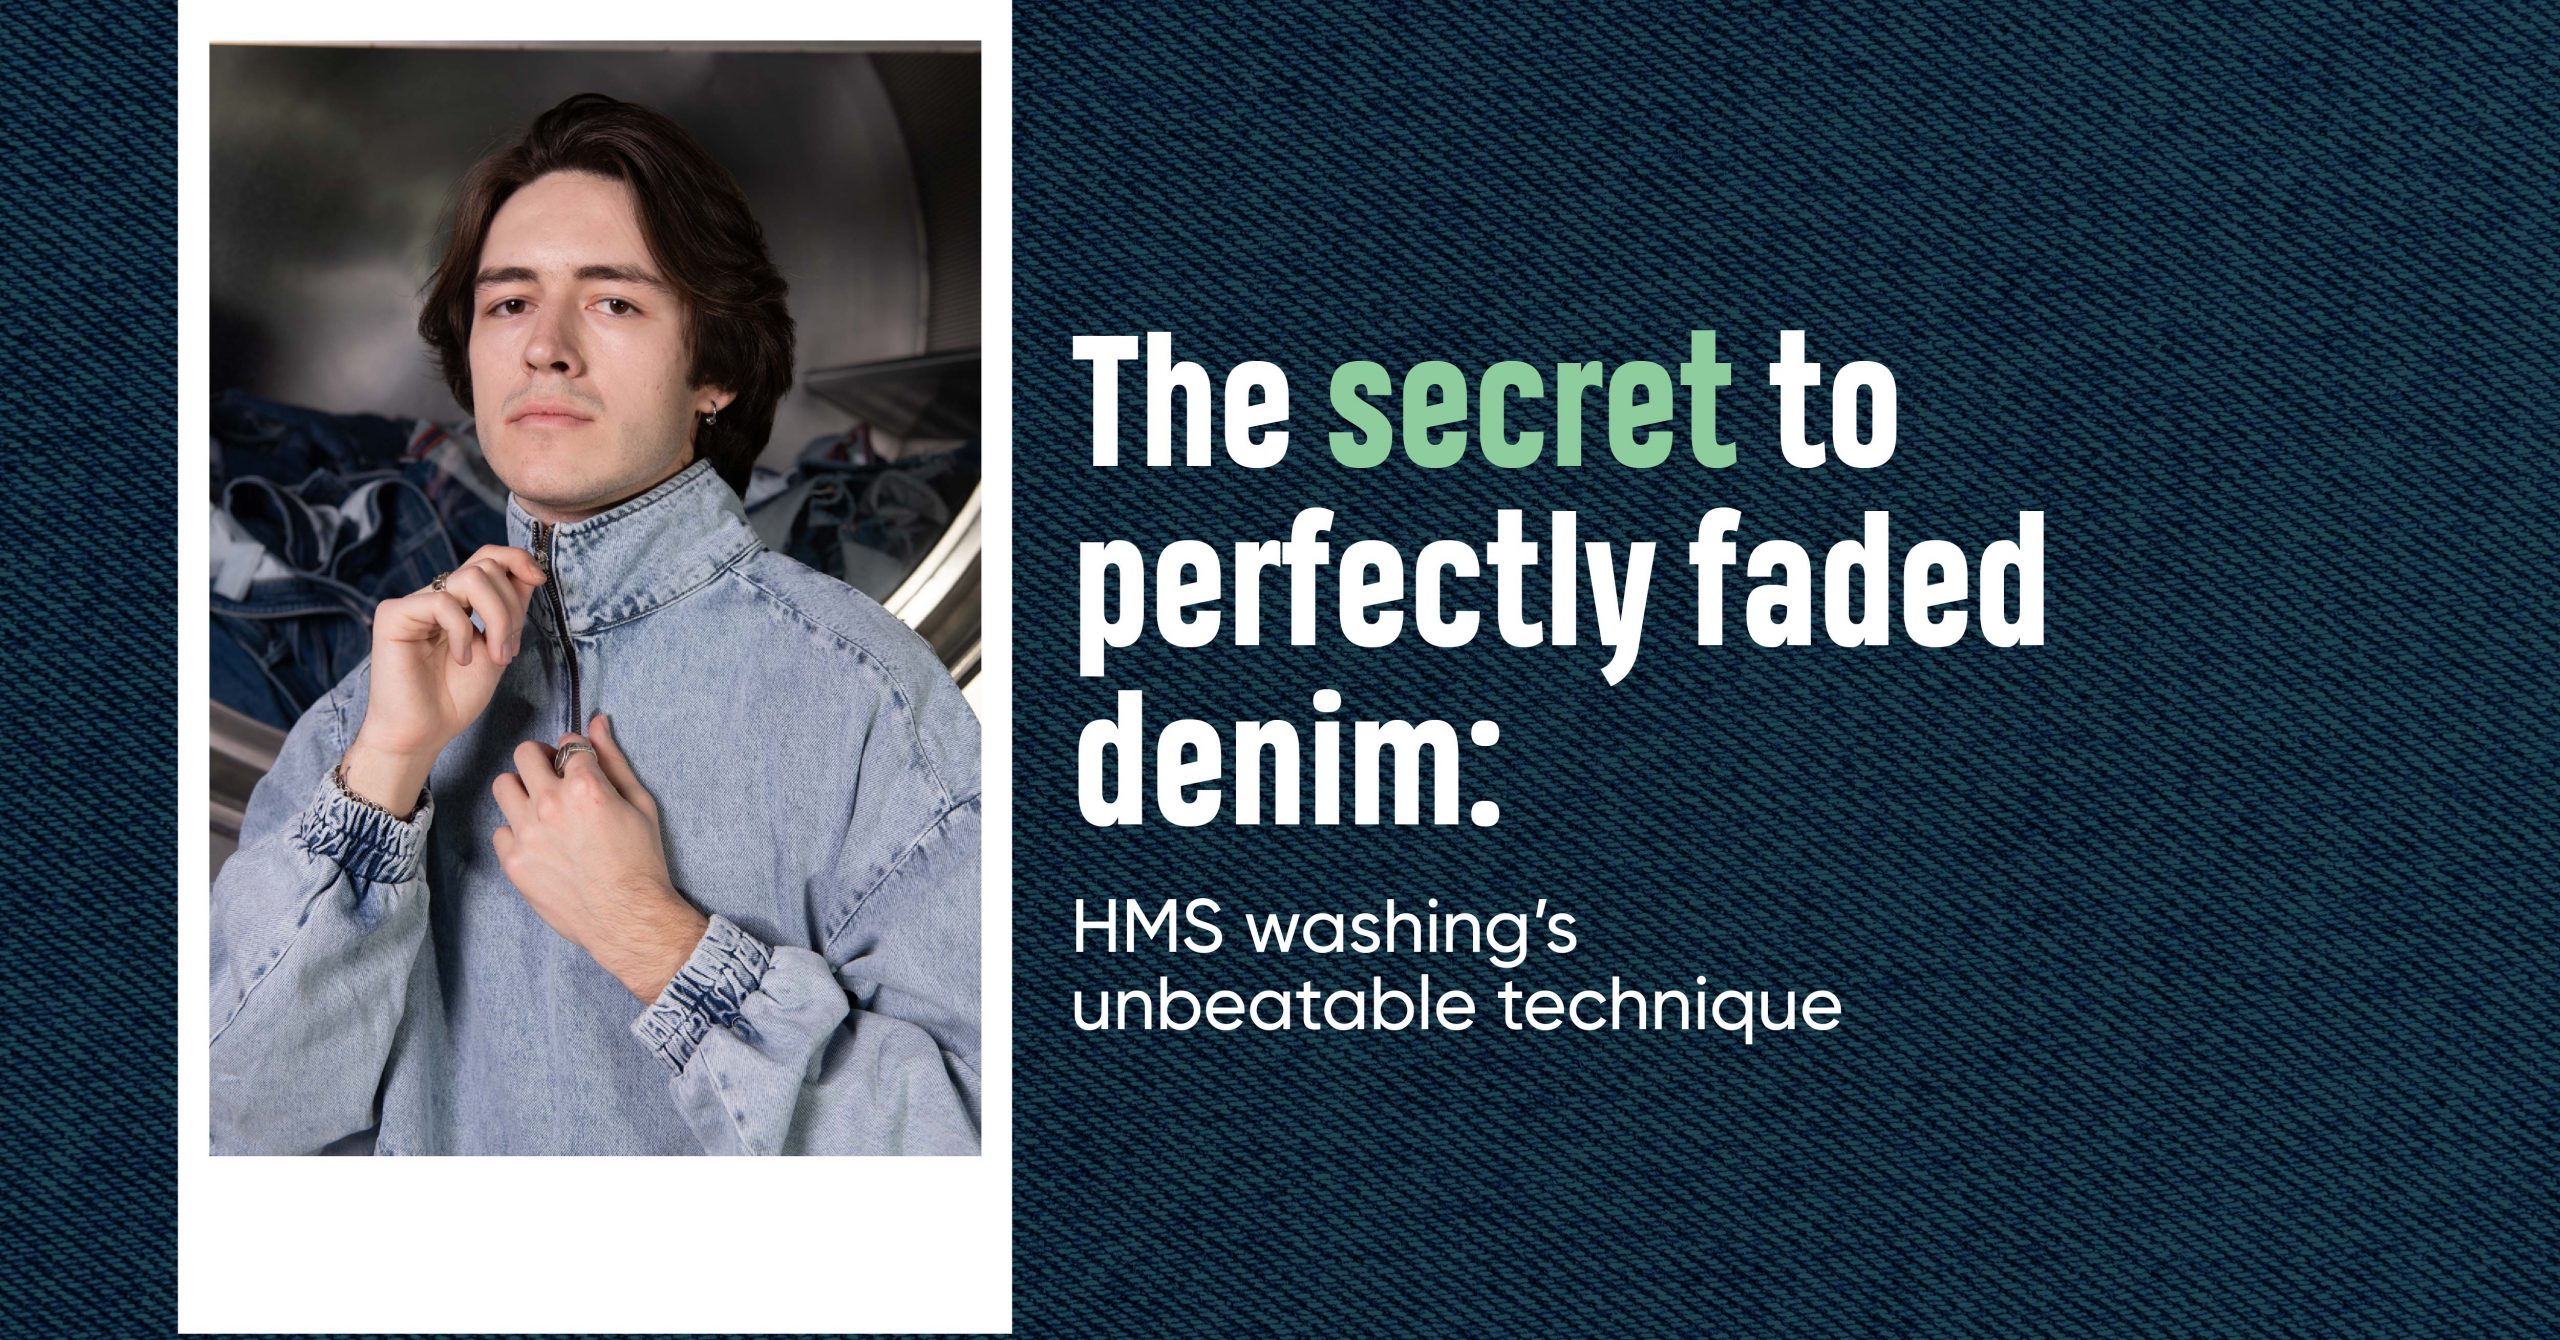 The secret to perfectly faded denim: HMS washing’s unbeatable technique